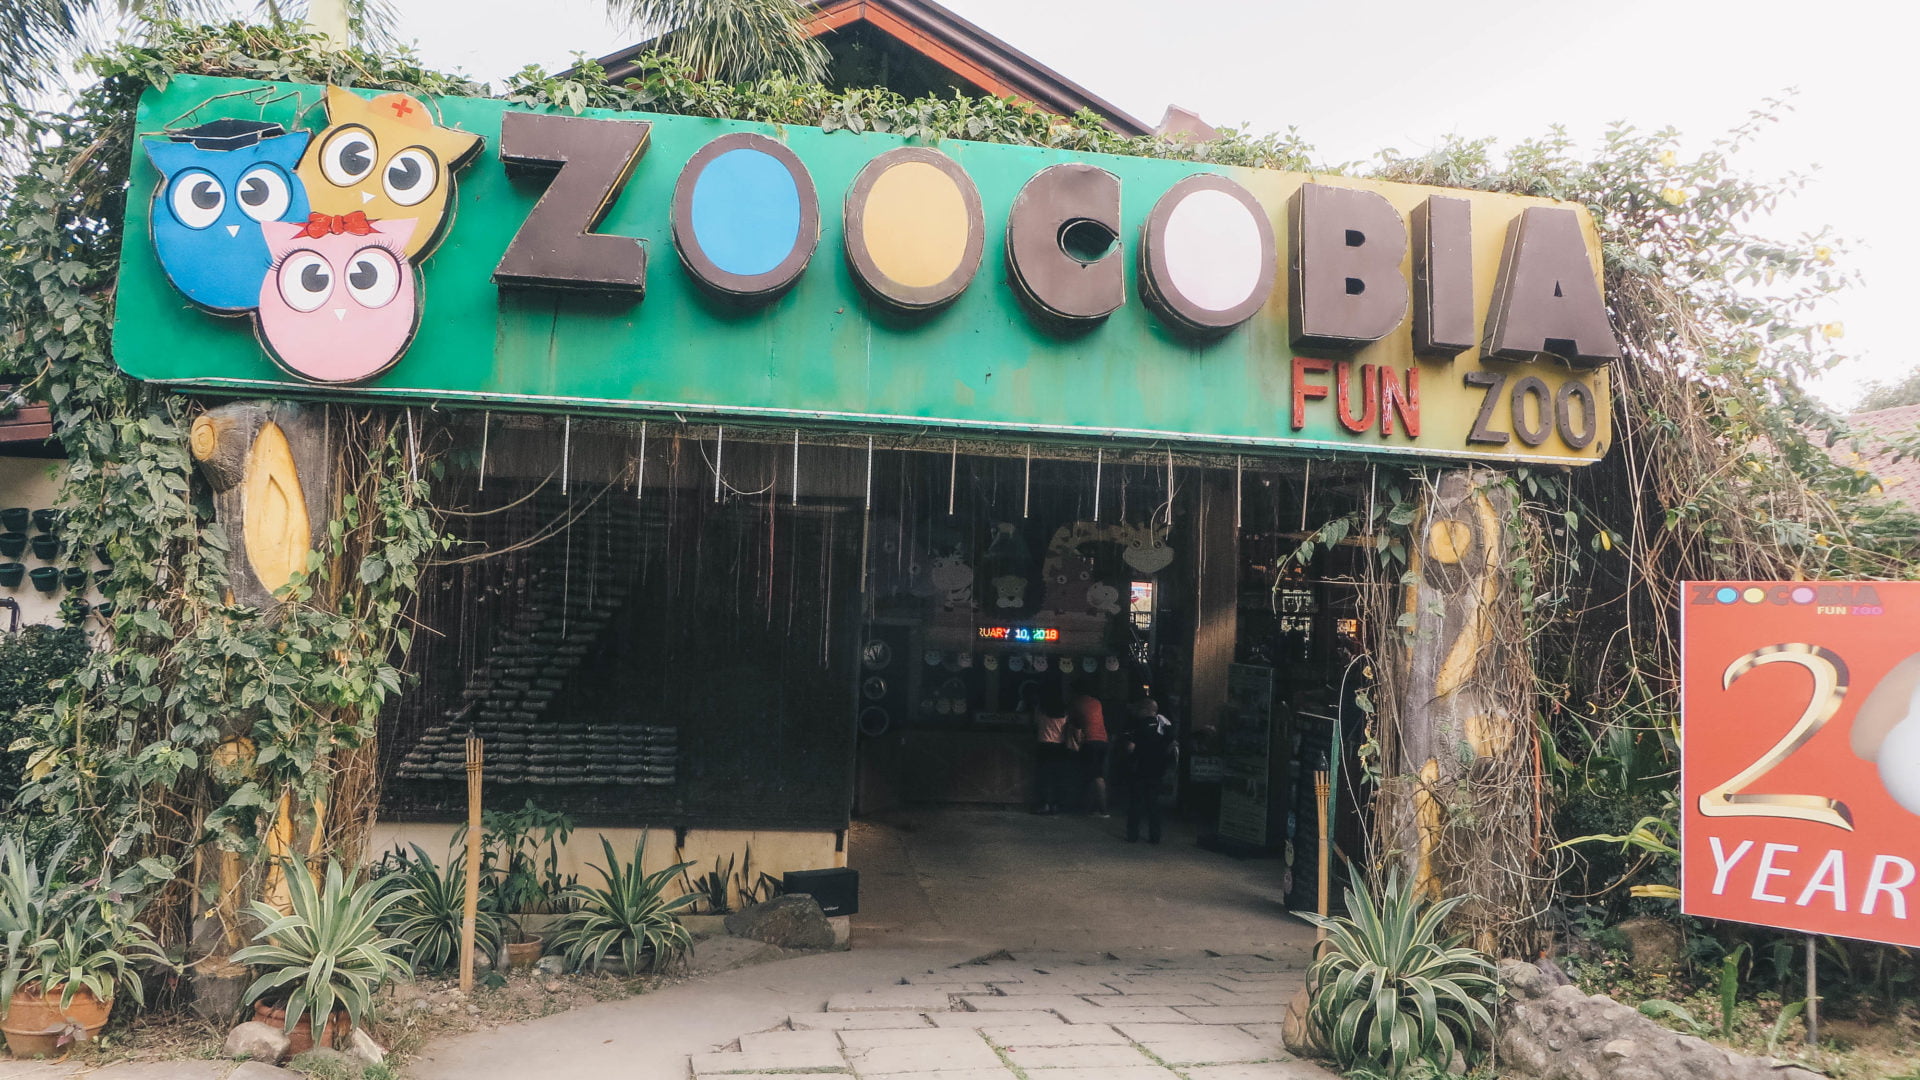 Zoocobia Fun Zoo and Paradise in Clark, Pampanga | What to See | What to Do